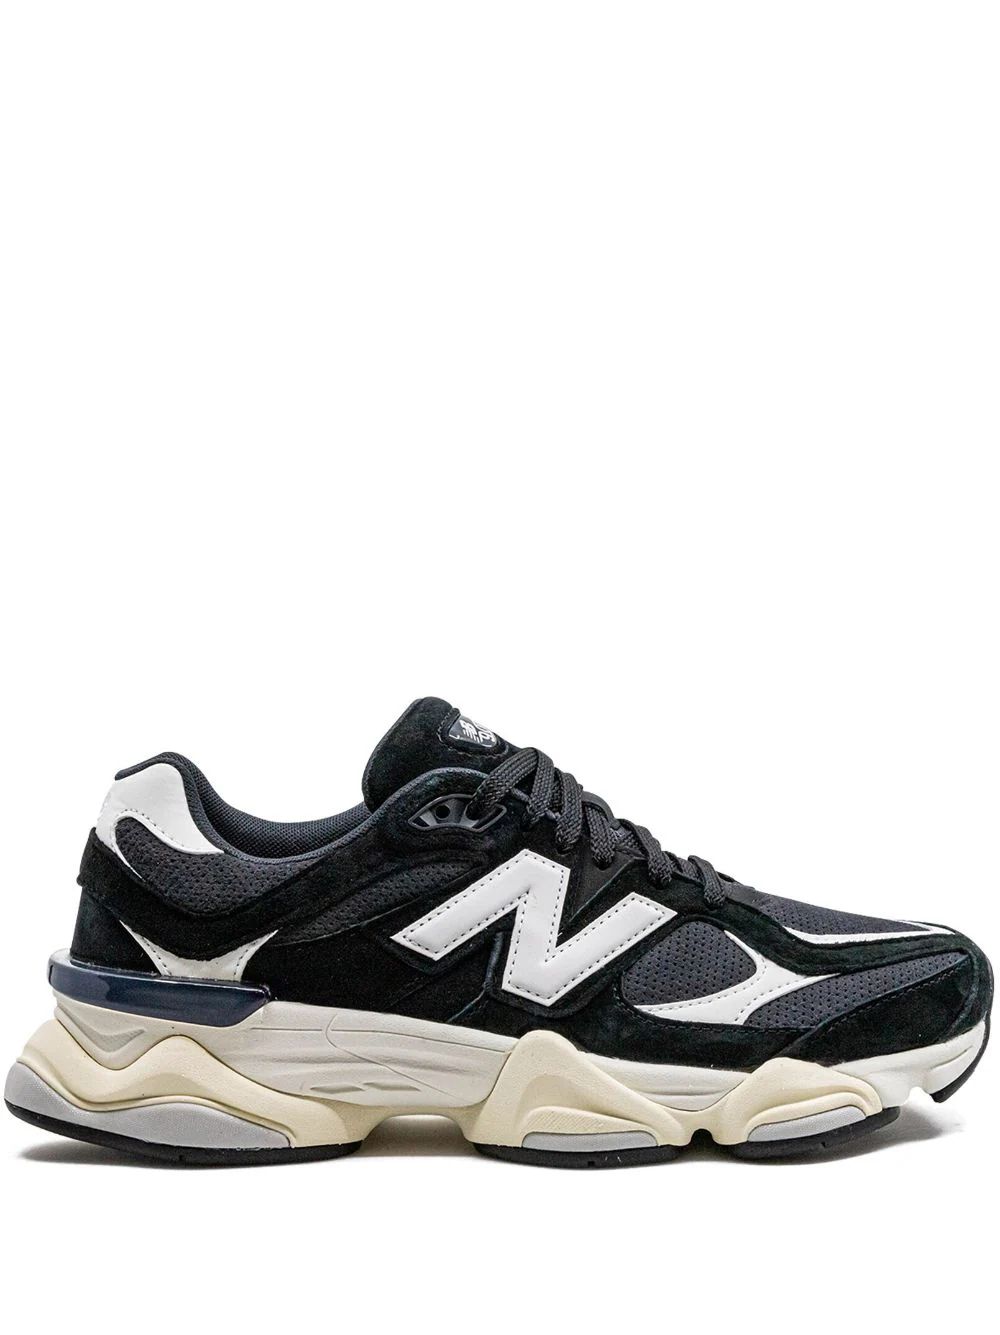 The DetailsNew Balance9060 "Black/White" sneakersThe New Balance 9060 features an innovation-driv... | Farfetch Global